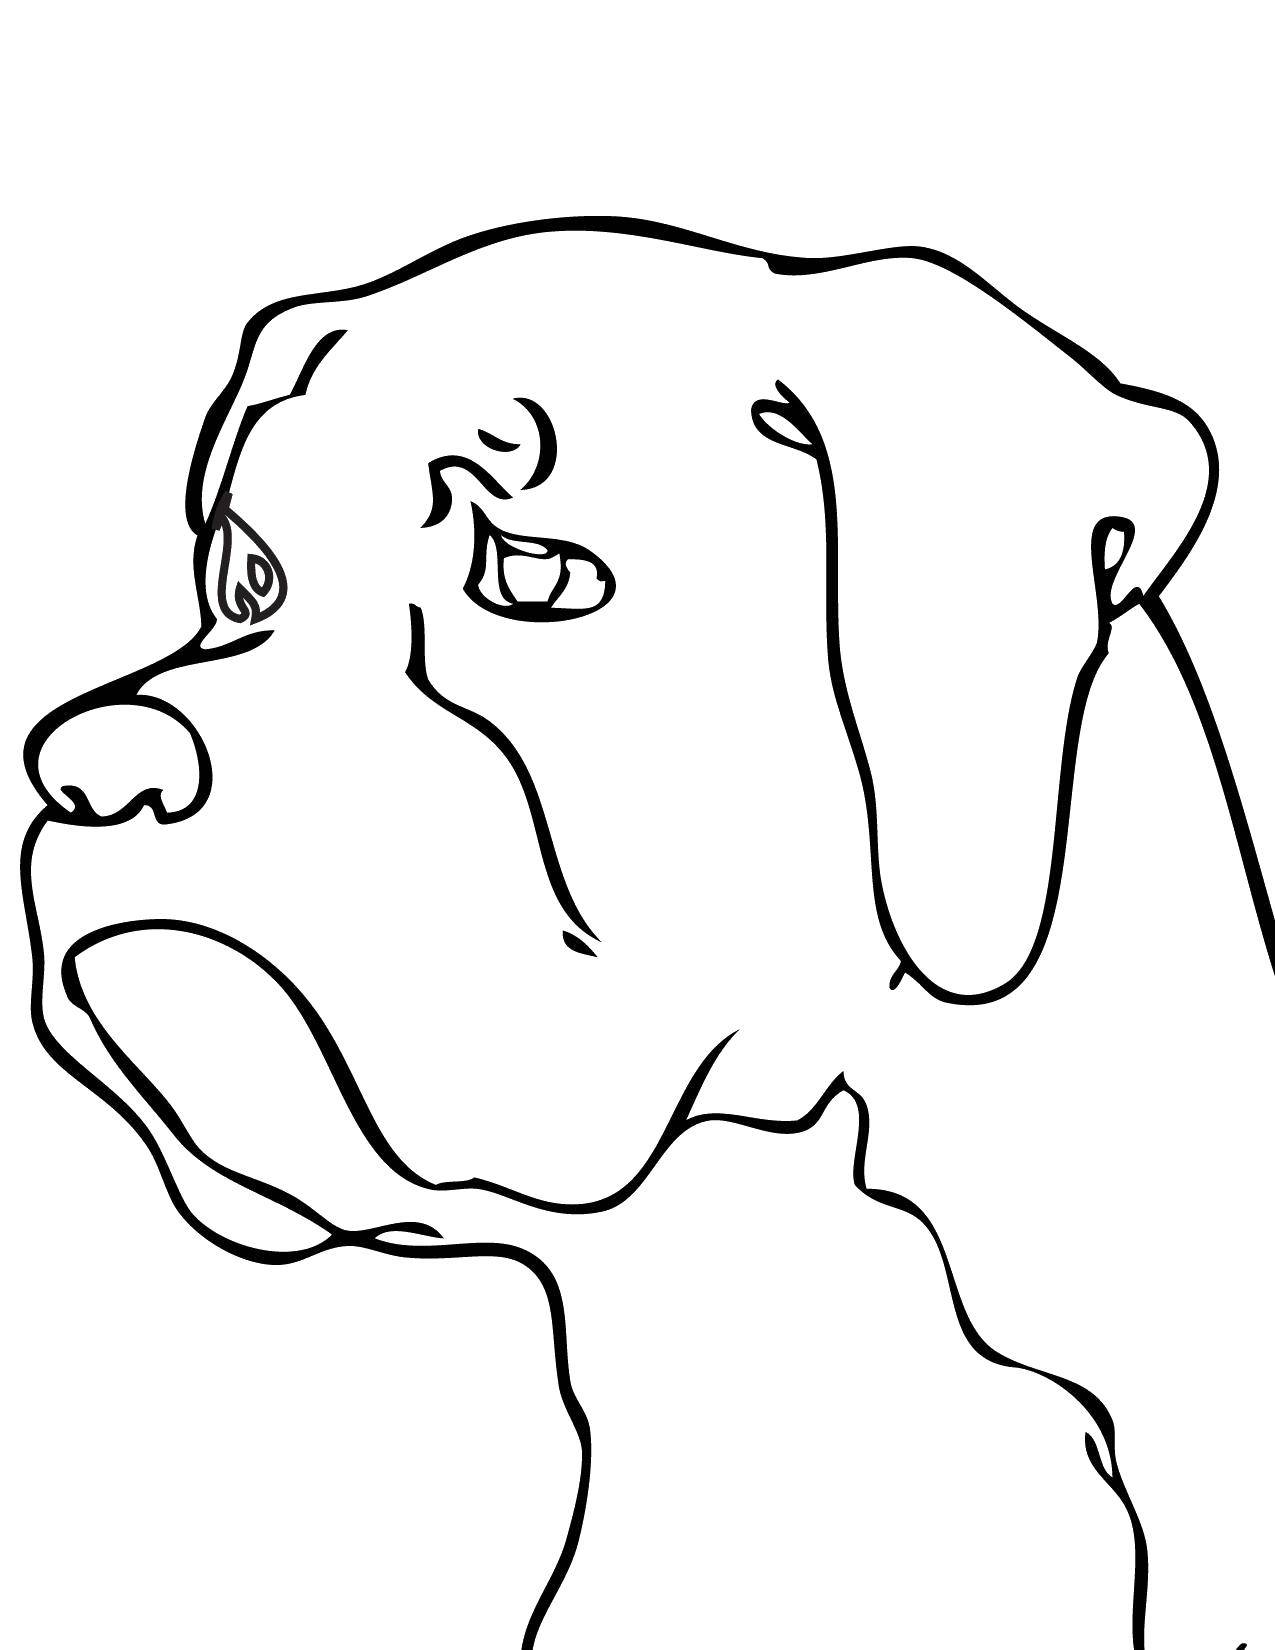 Coloring Beautiful face. Category Animals. Tags:  Animals, dog.